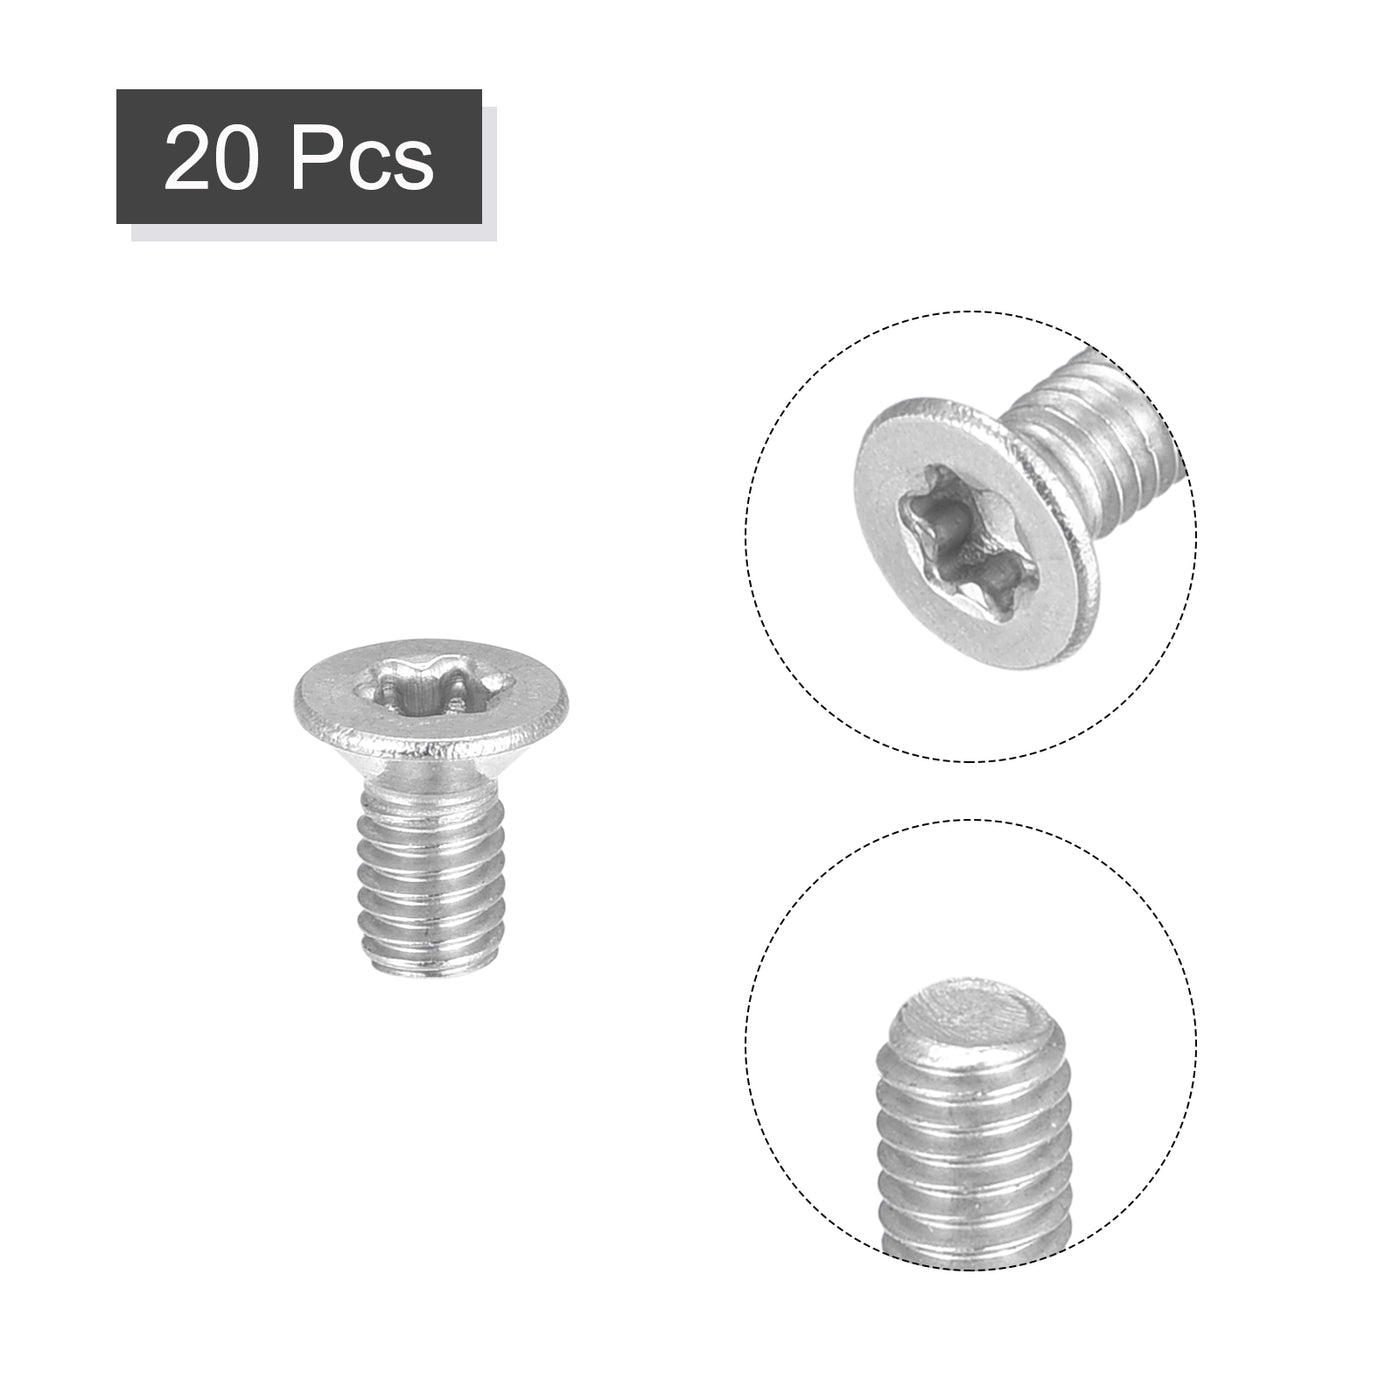 uxcell Uxcell M3x6mm Torx Security Screws, 20pcs 316 Stainless Steel Countersunk Head Screw